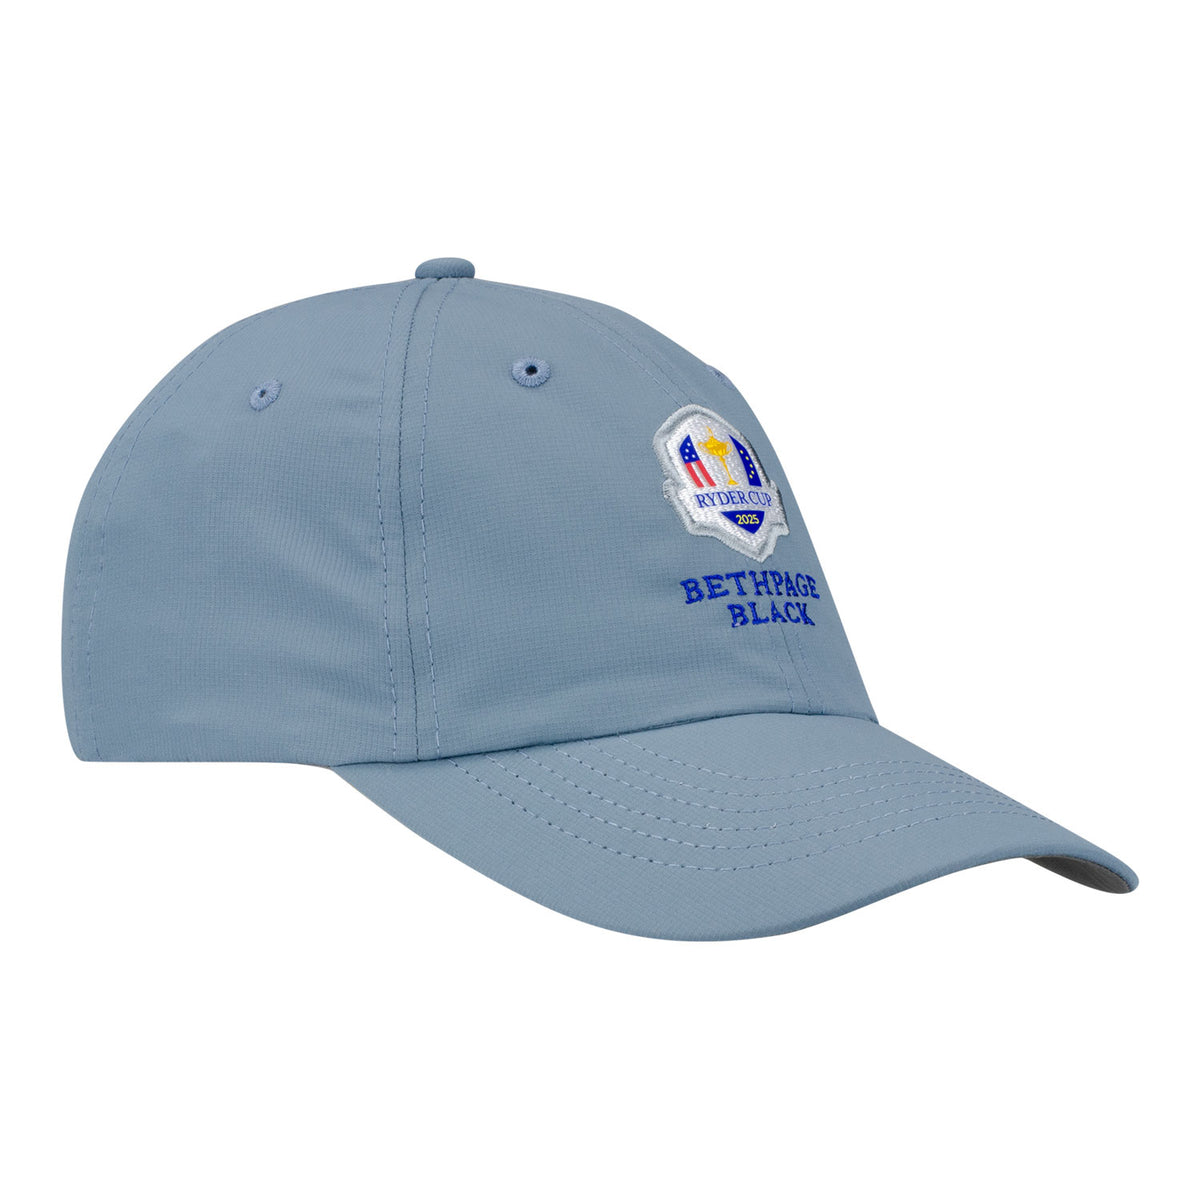 Imperial 2025 Ryder Cup Original Performance Hat in Breaker Blue - Angled Front Right View